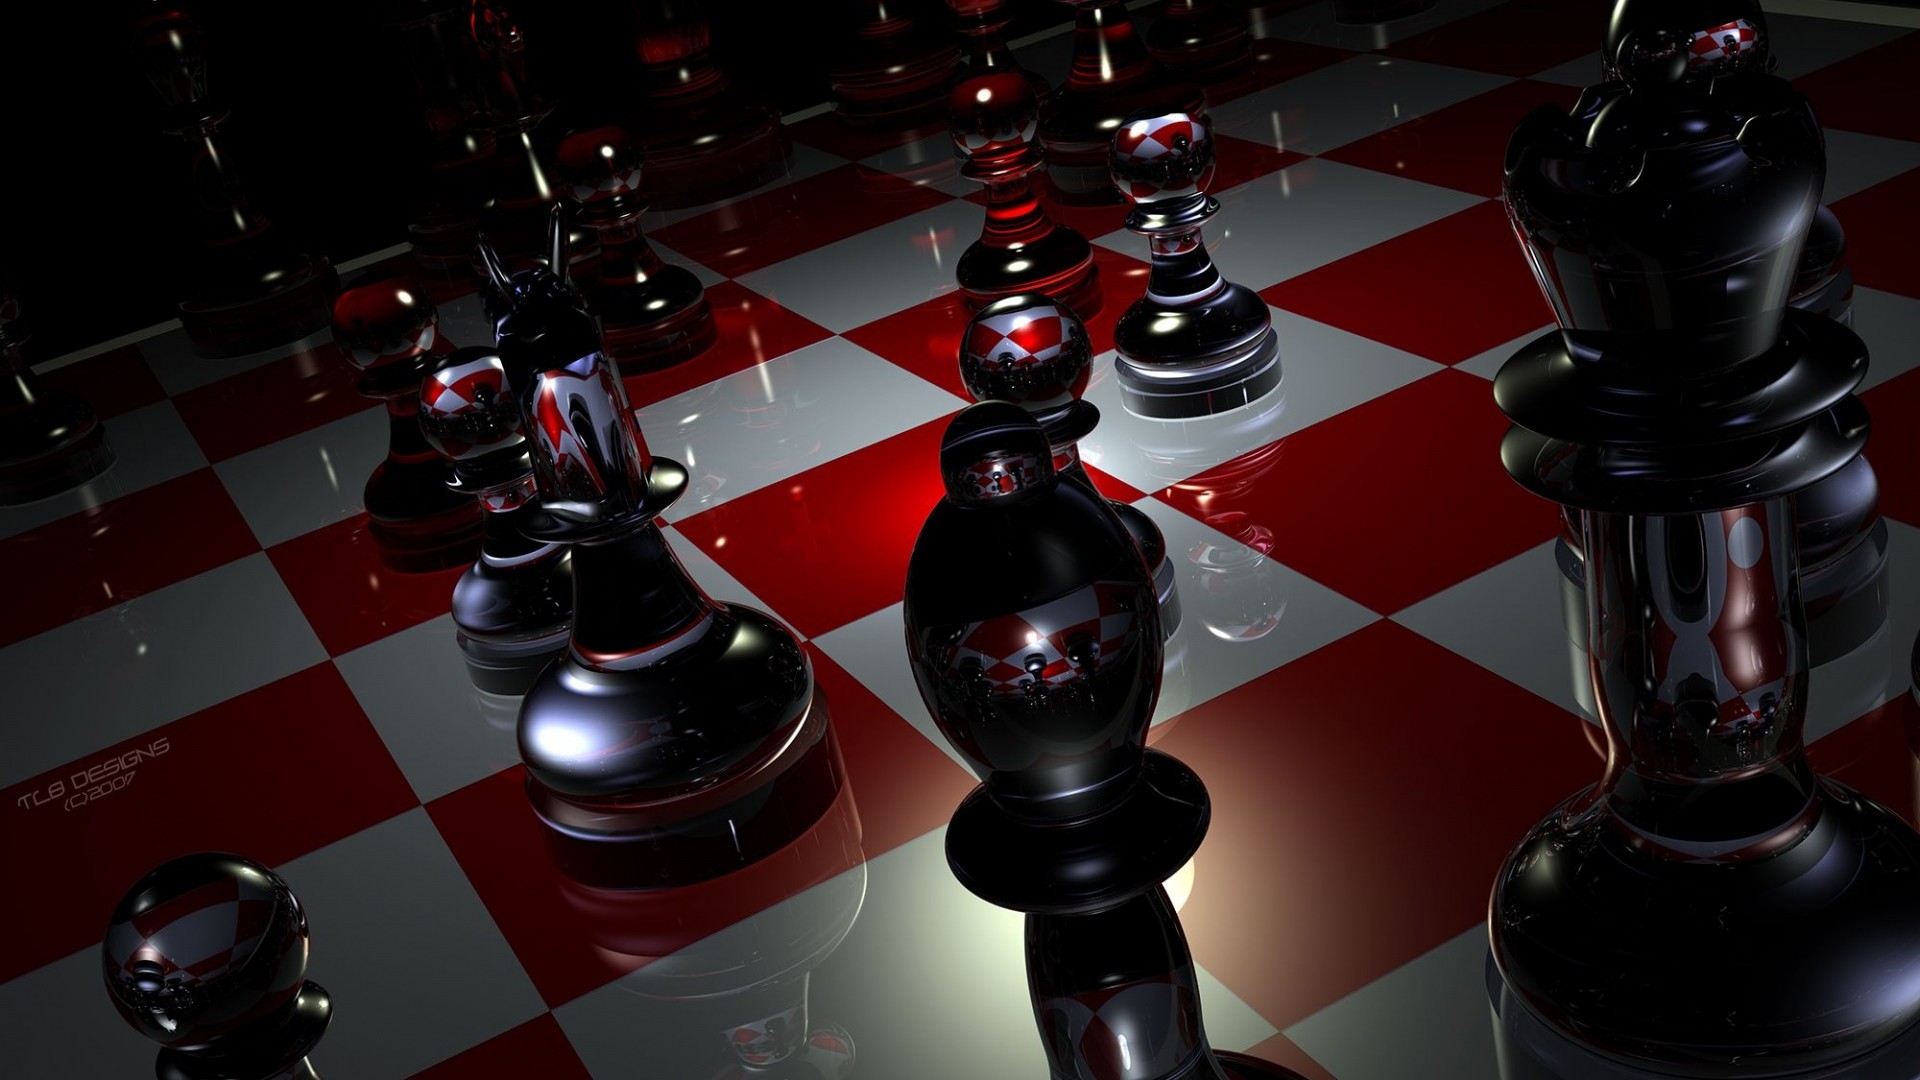 1920x1080 ... Background Full HD 1080p.  Wallpaper pieces, chess, boards,  glass